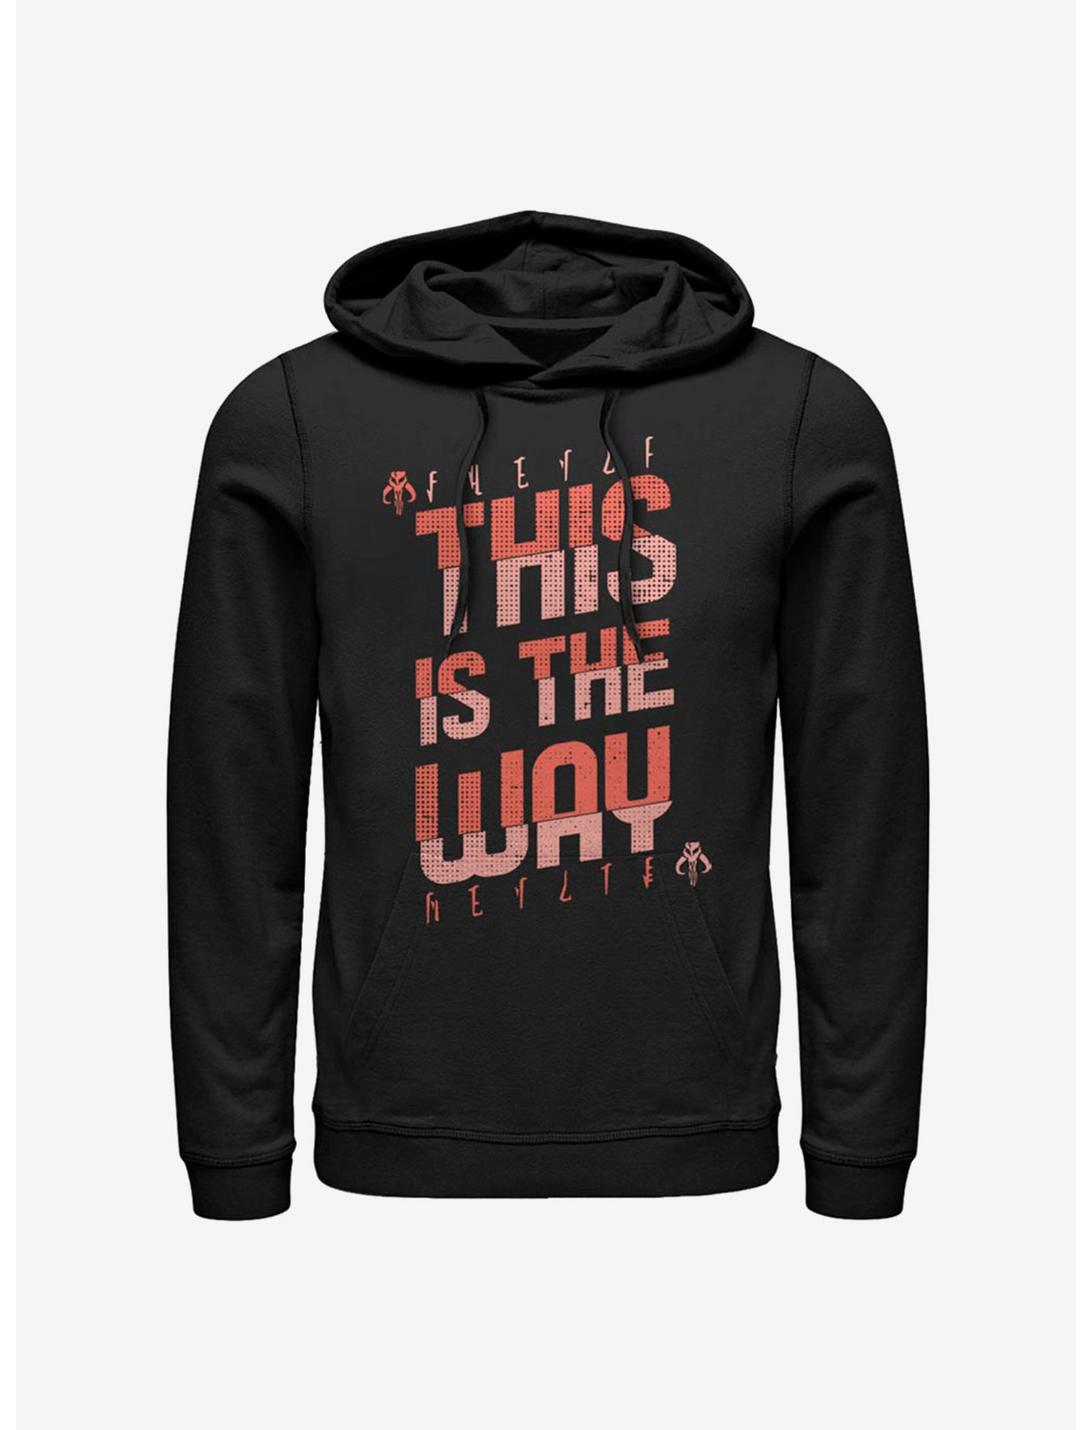 Star Wars The Mandalorian This Is The Way Mando'a Bold Text Hoodie, BLACK, hi-res